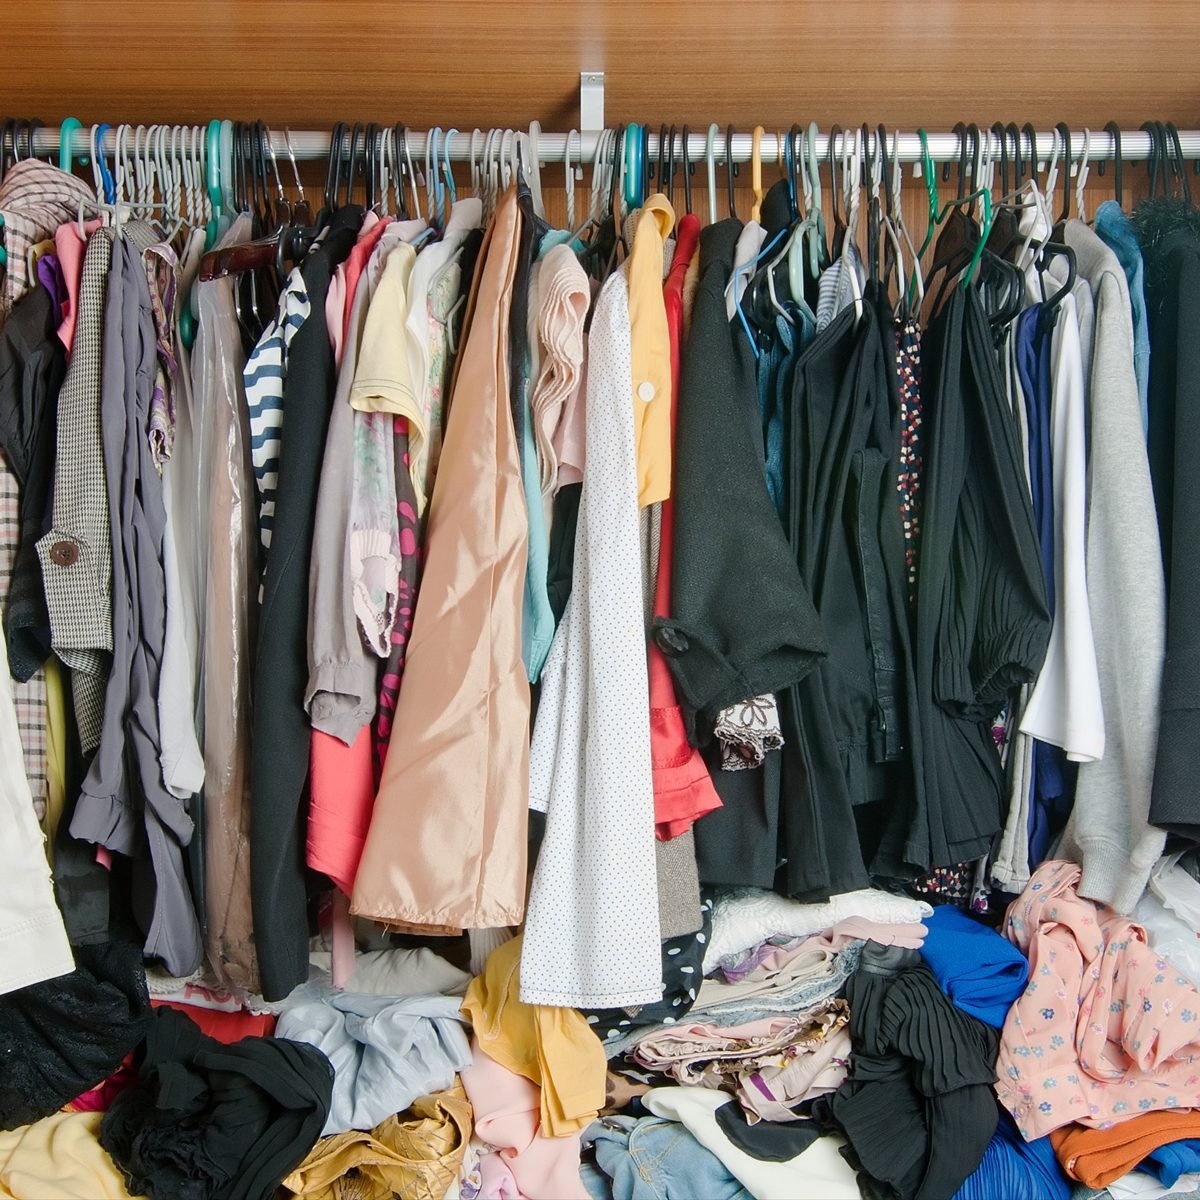 How to Share a Closet and Avoid the Battle for Closet Space